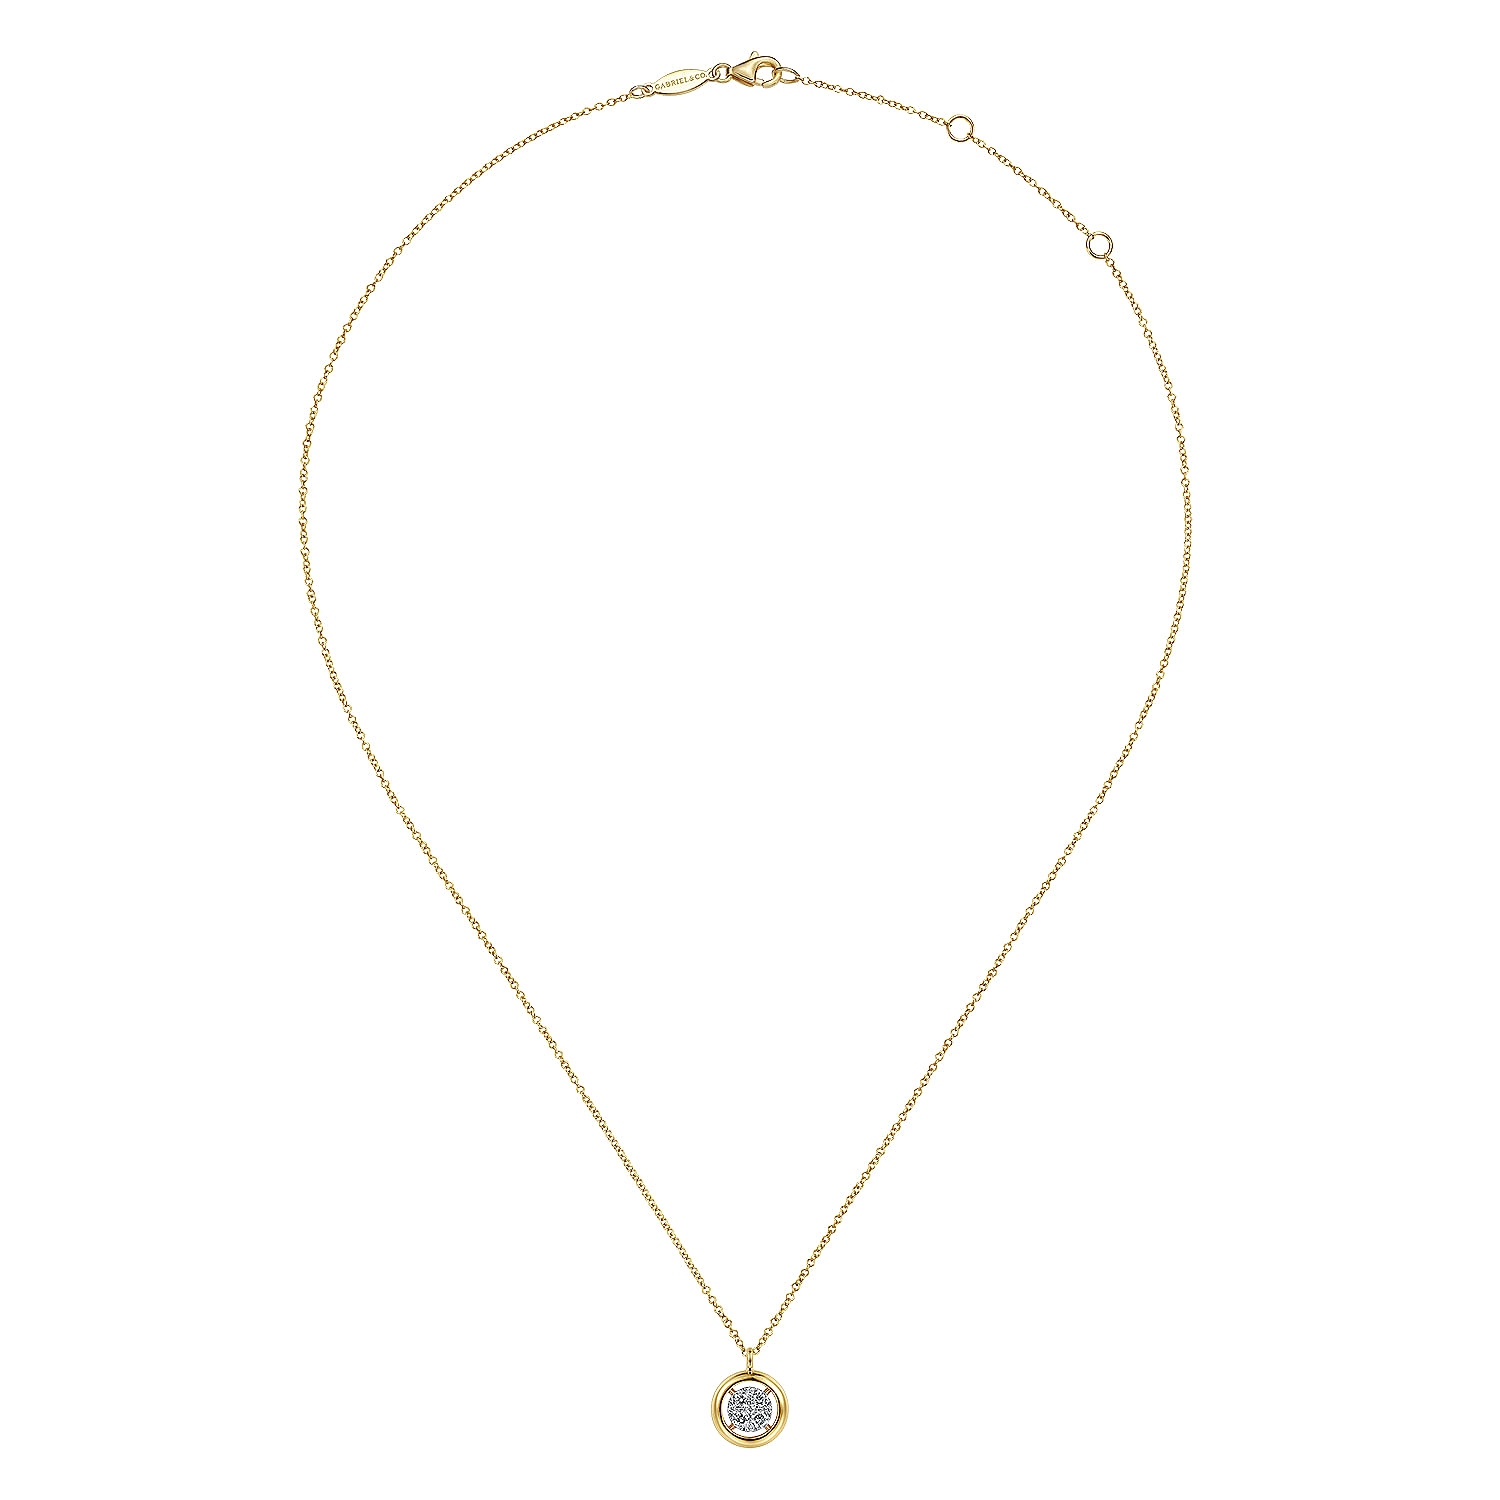 14K Yellow Gold Round Pave Diamond Floating Pendant Necklace with Wide Border - 0.3 ct - Shot 2